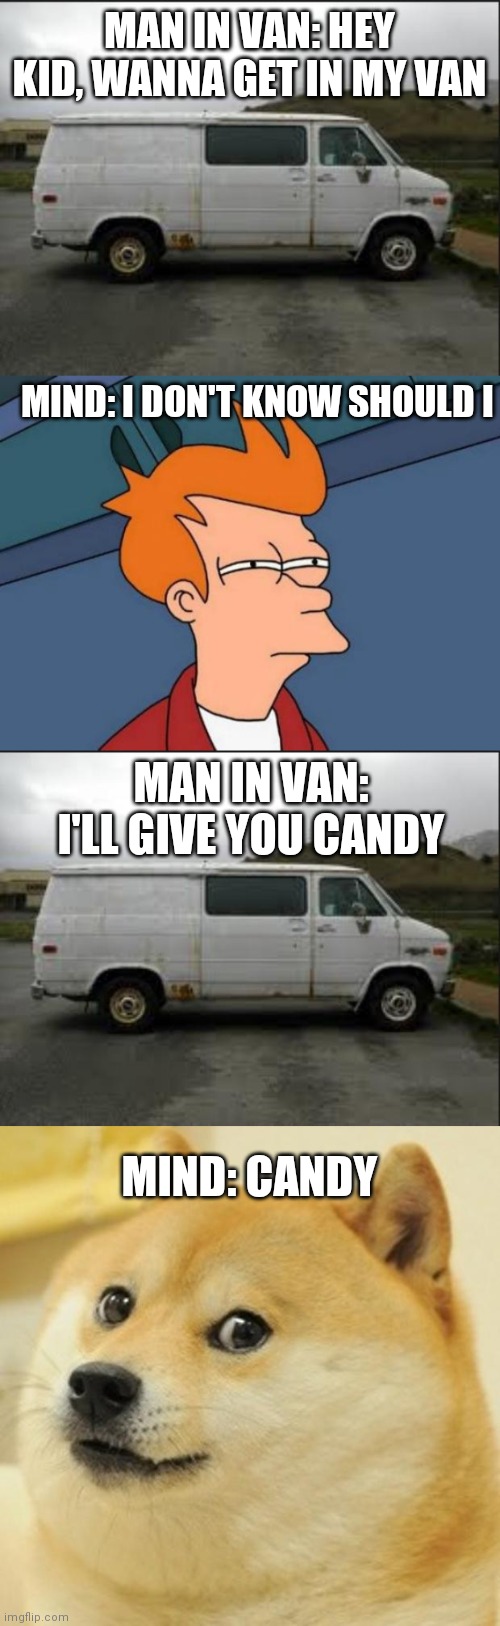 What children do for their candy | MAN IN VAN: HEY KID, WANNA GET IN MY VAN; MIND: I DON'T KNOW SHOULD I; MAN IN VAN: I'LL GIVE YOU CANDY; MIND: CANDY | image tagged in creepy van,memes,futurama fry,doge | made w/ Imgflip meme maker